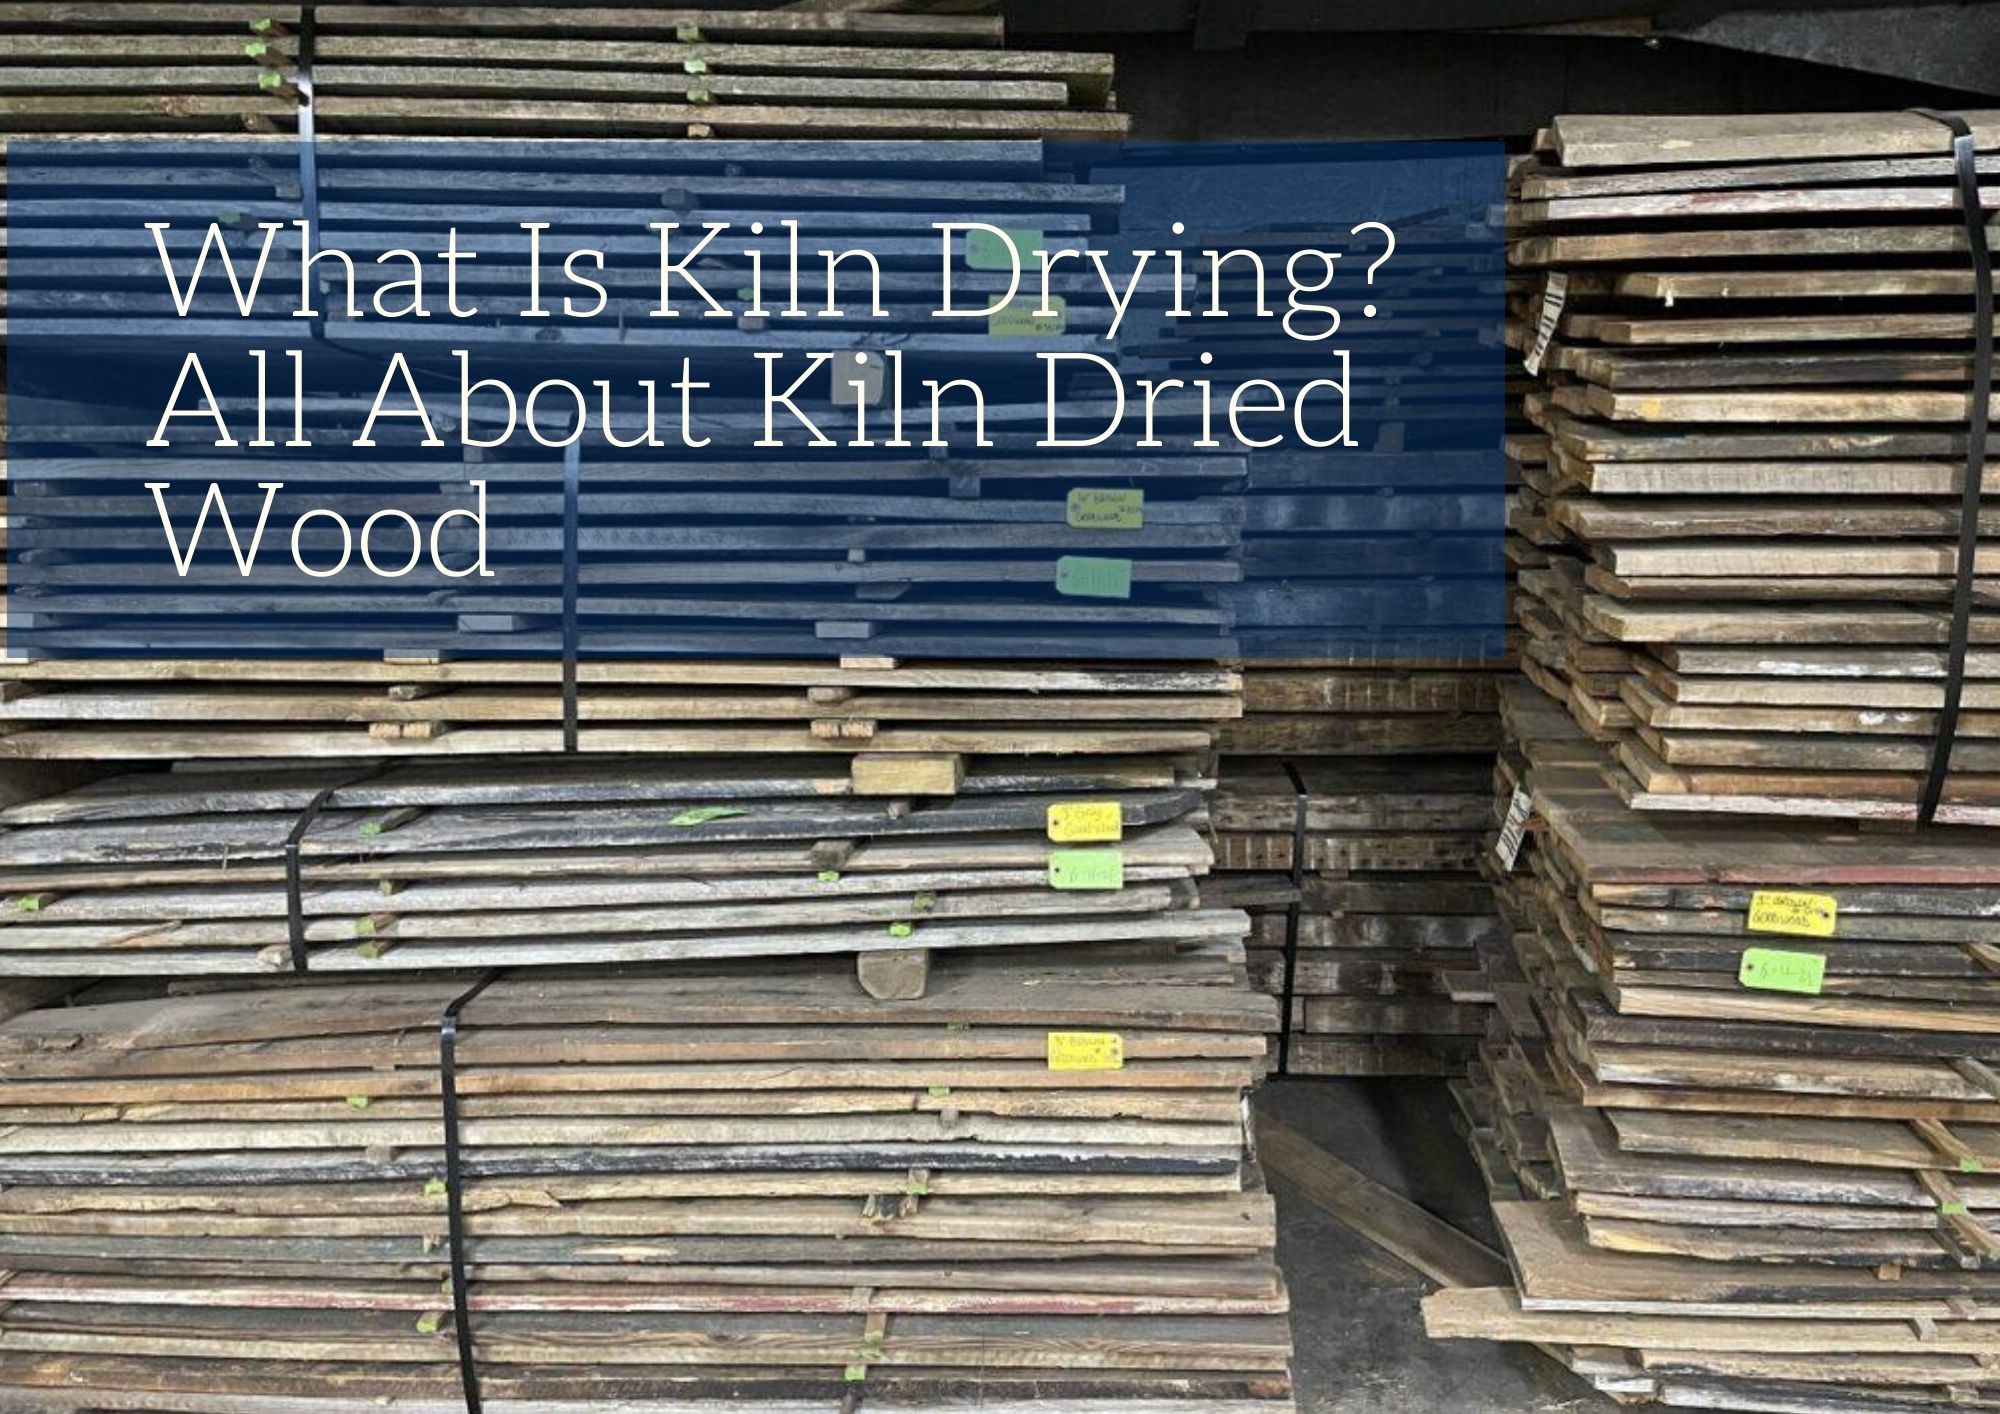 What Is Kiln Drying? All About Kiln Dried Wood